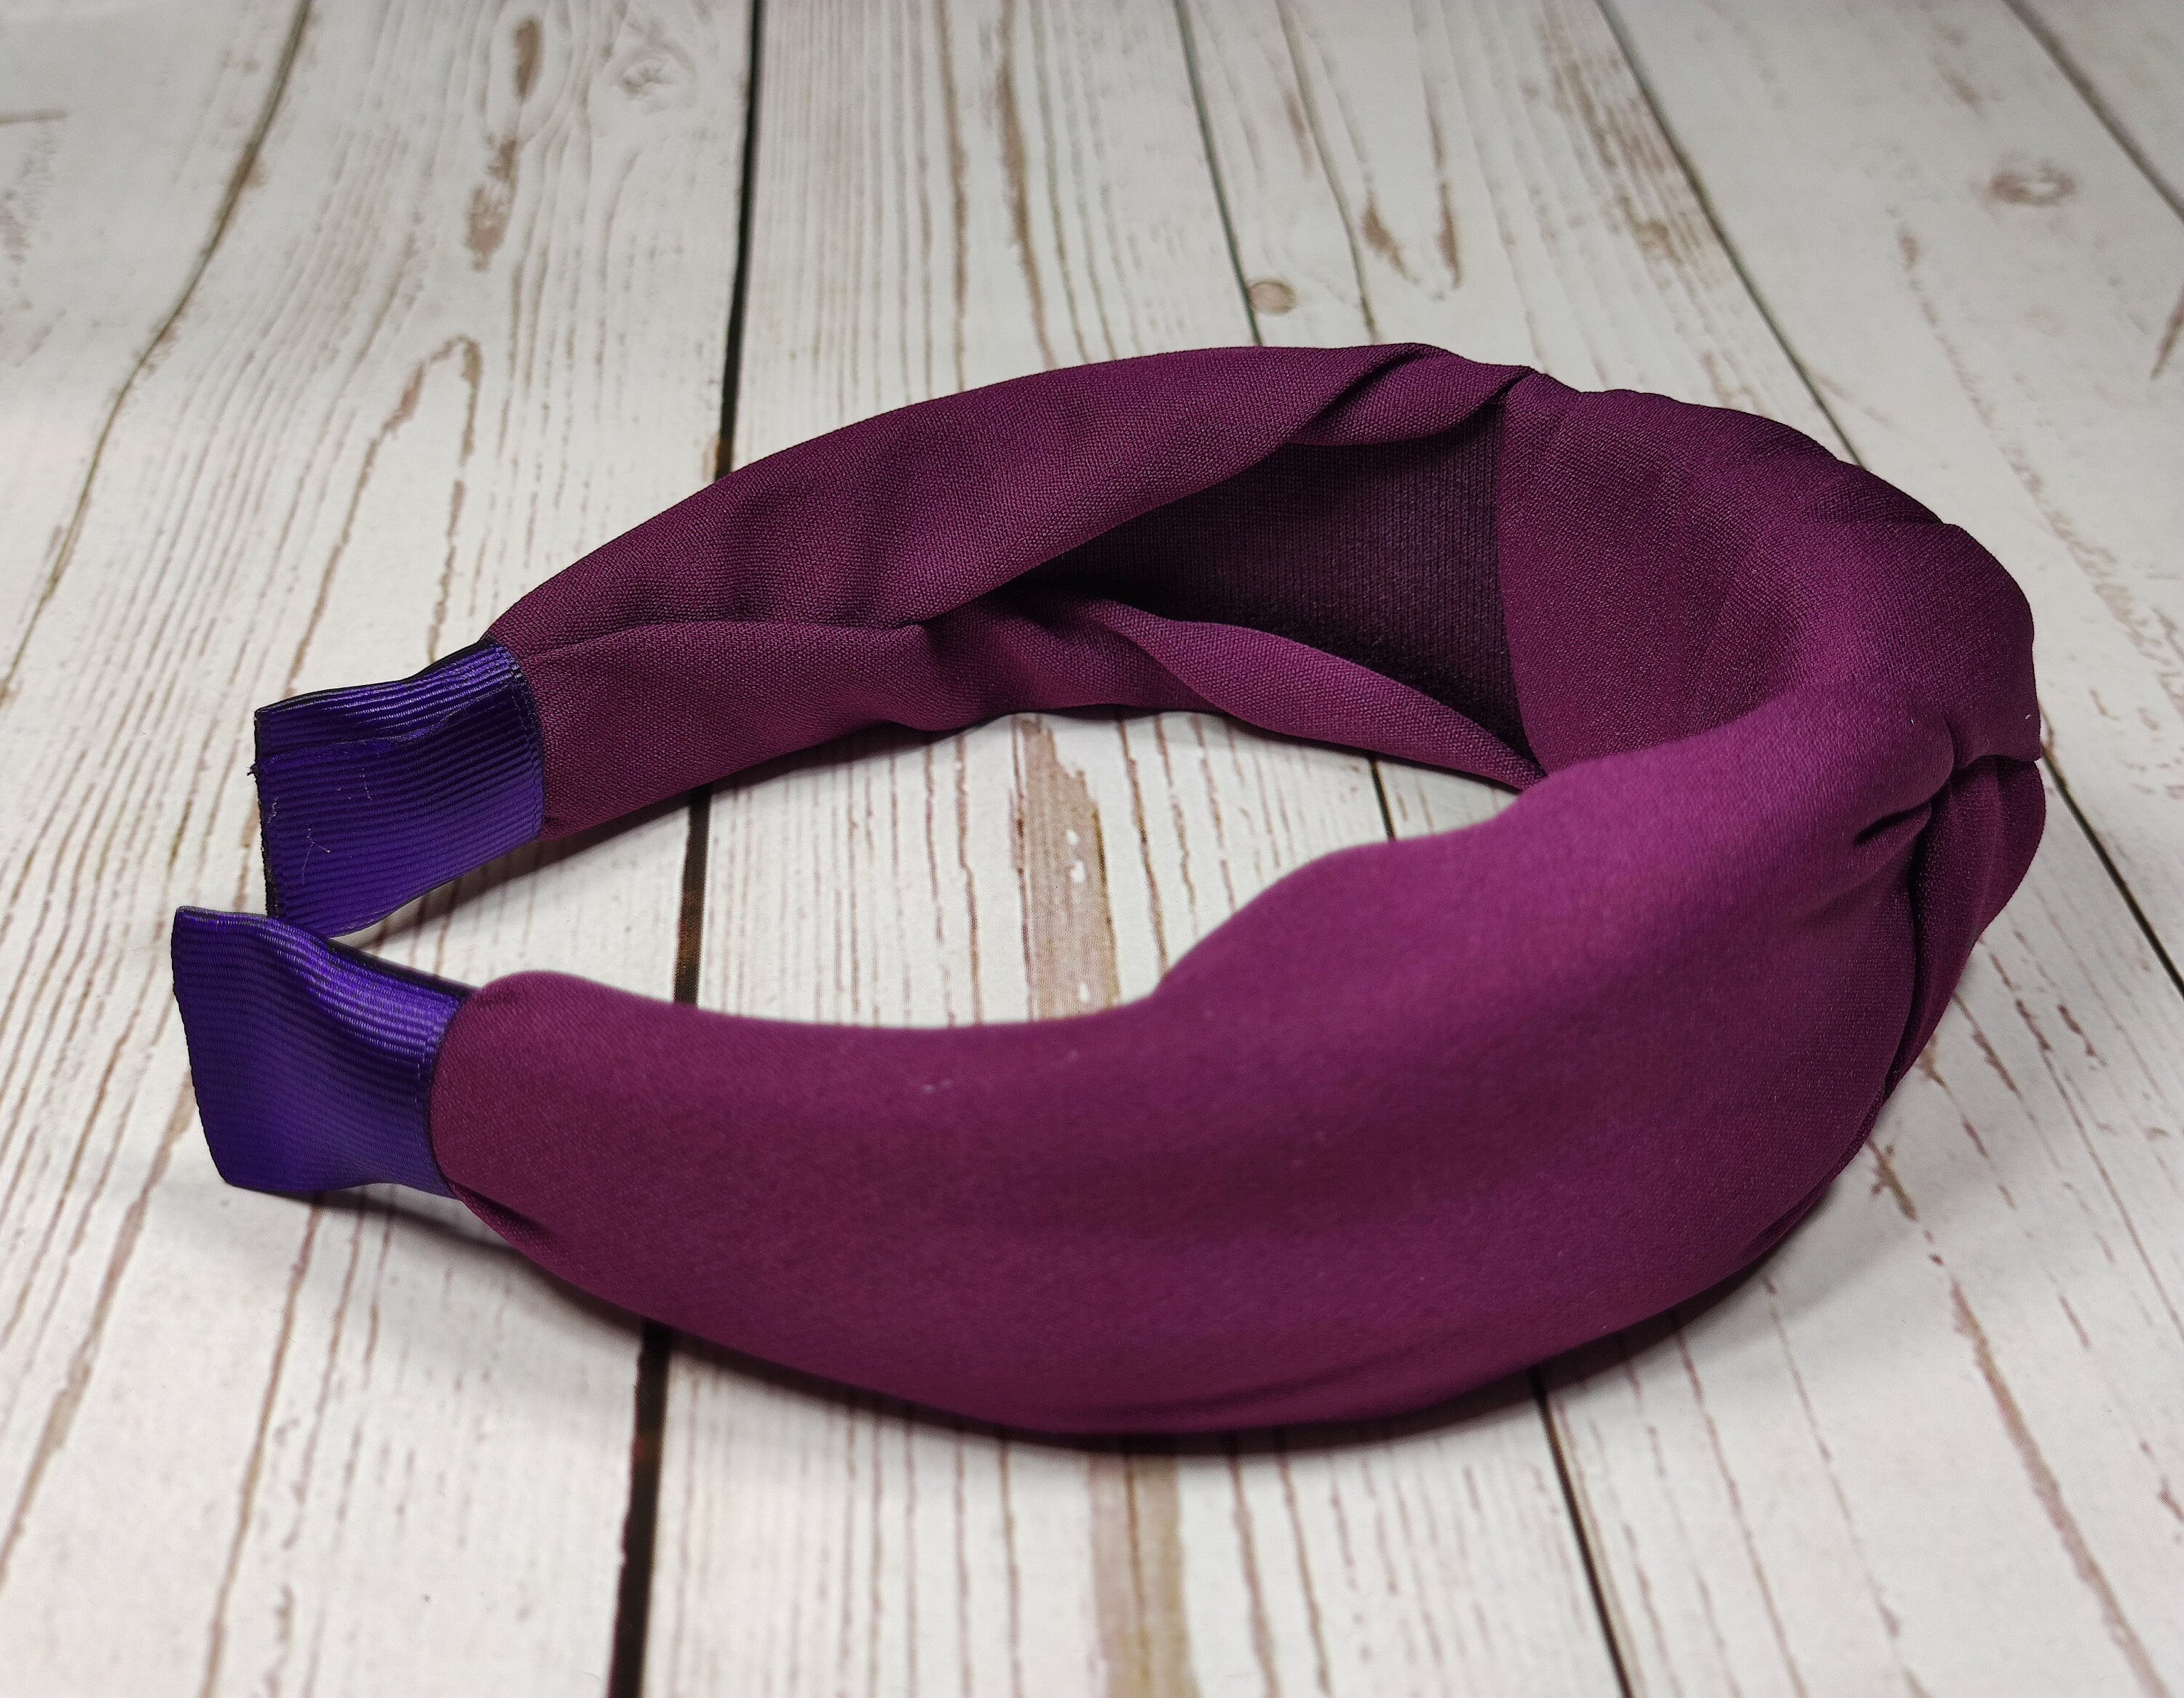 Make a statement with this knotted headband. It is made from soft and durable cotton material and will add personality and interest to any outfit.